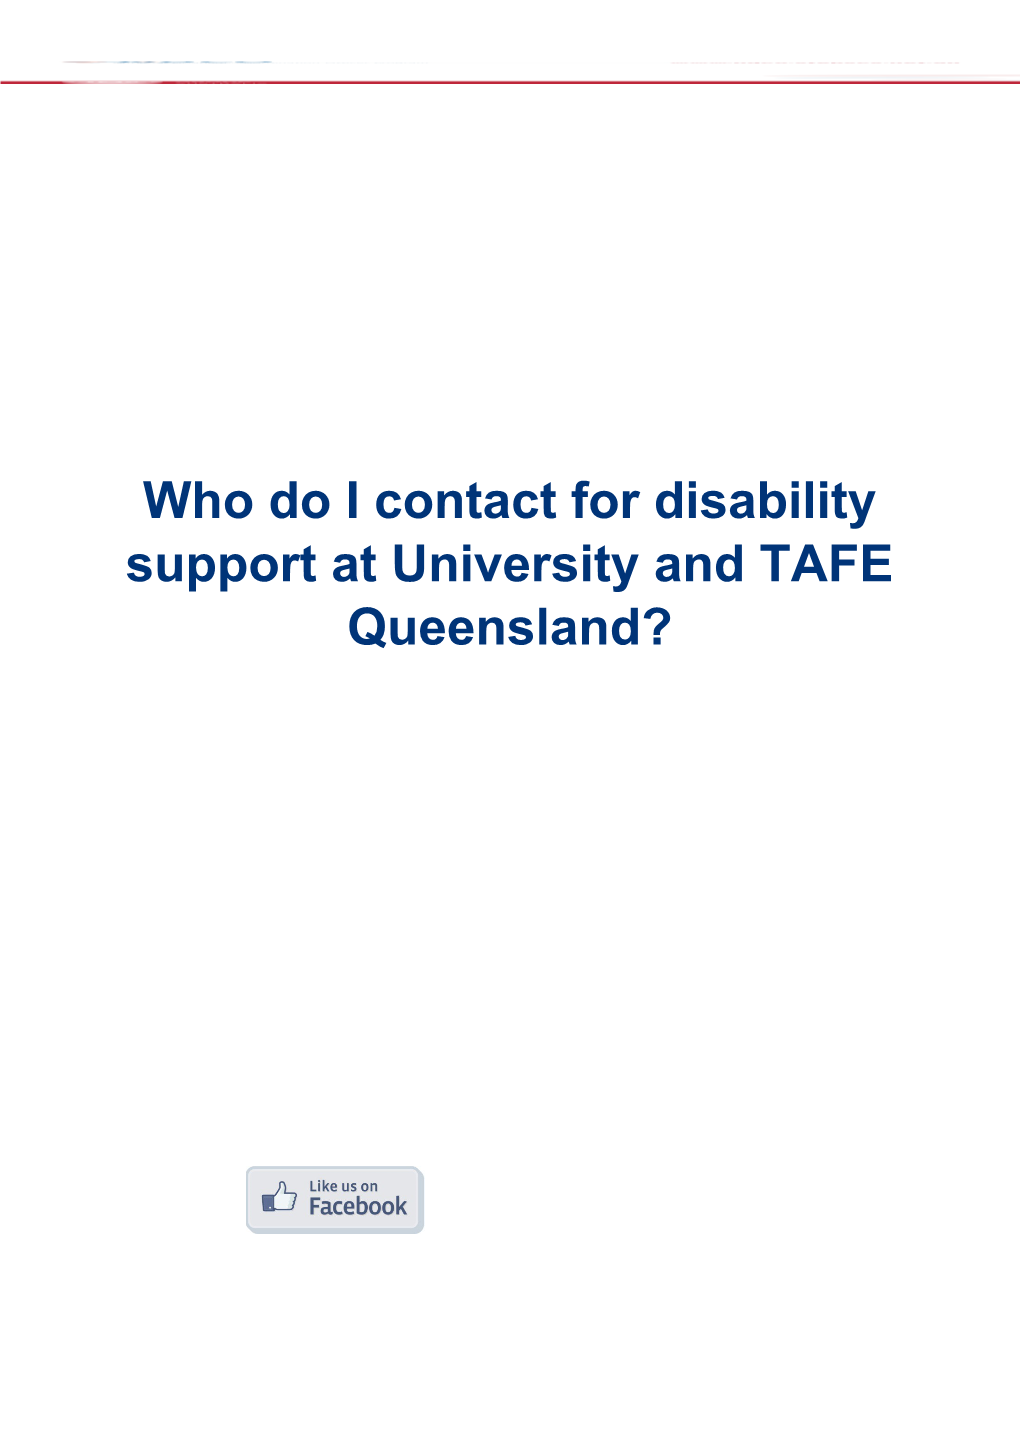 Who Do I Contact for Disability Support at University and TAFE Queensland?